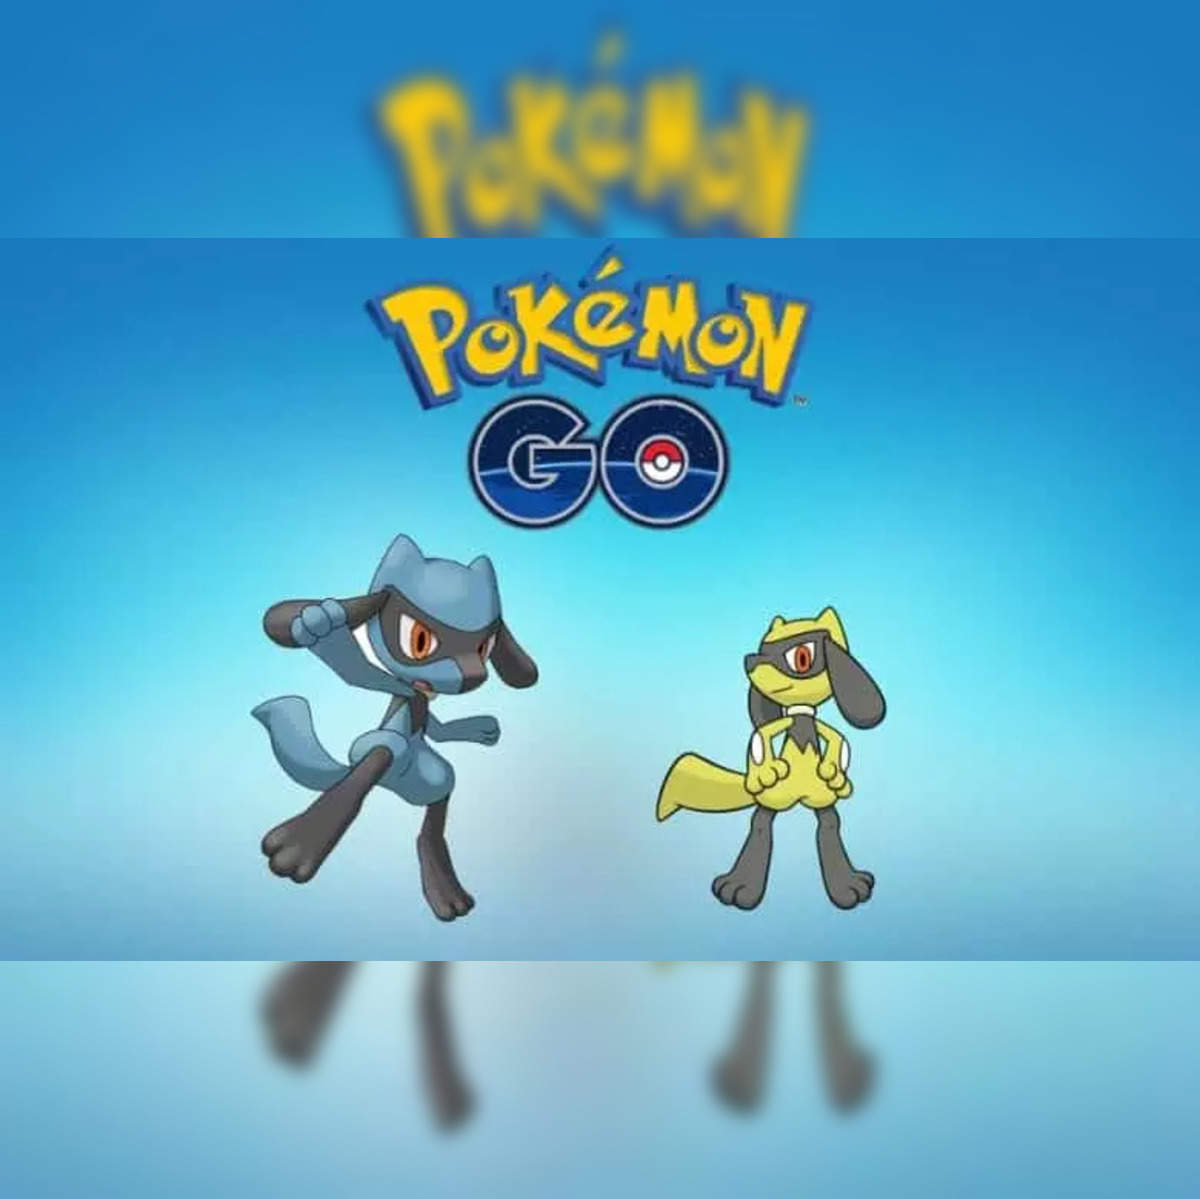 Everything you need to know about Shiny Pokemon in Pokemon Go